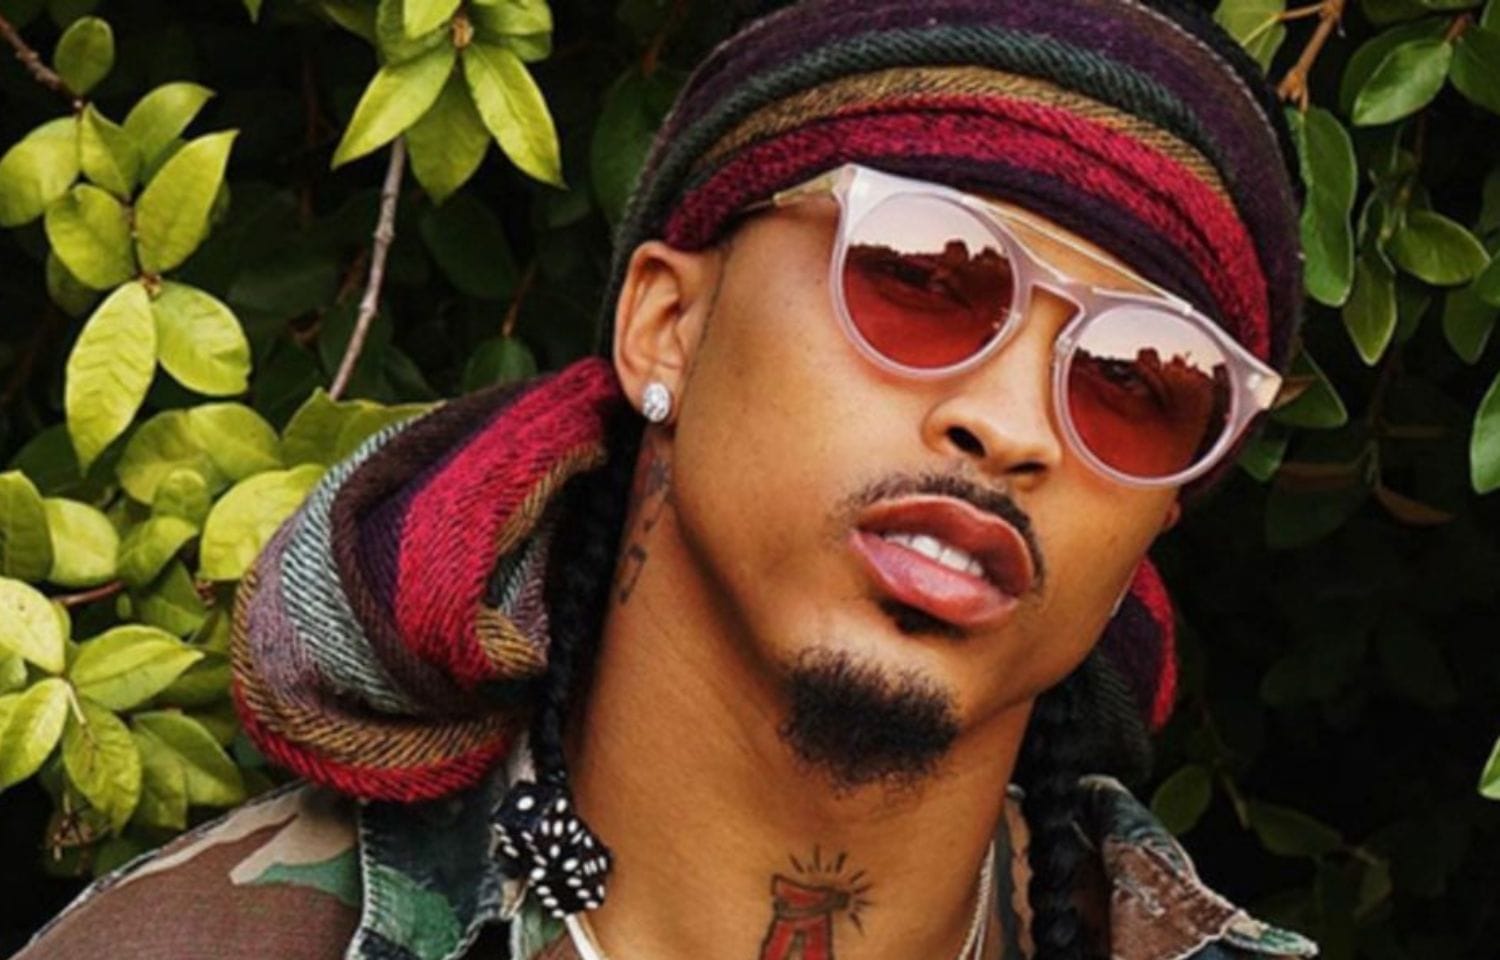 Who Is August Alsina?